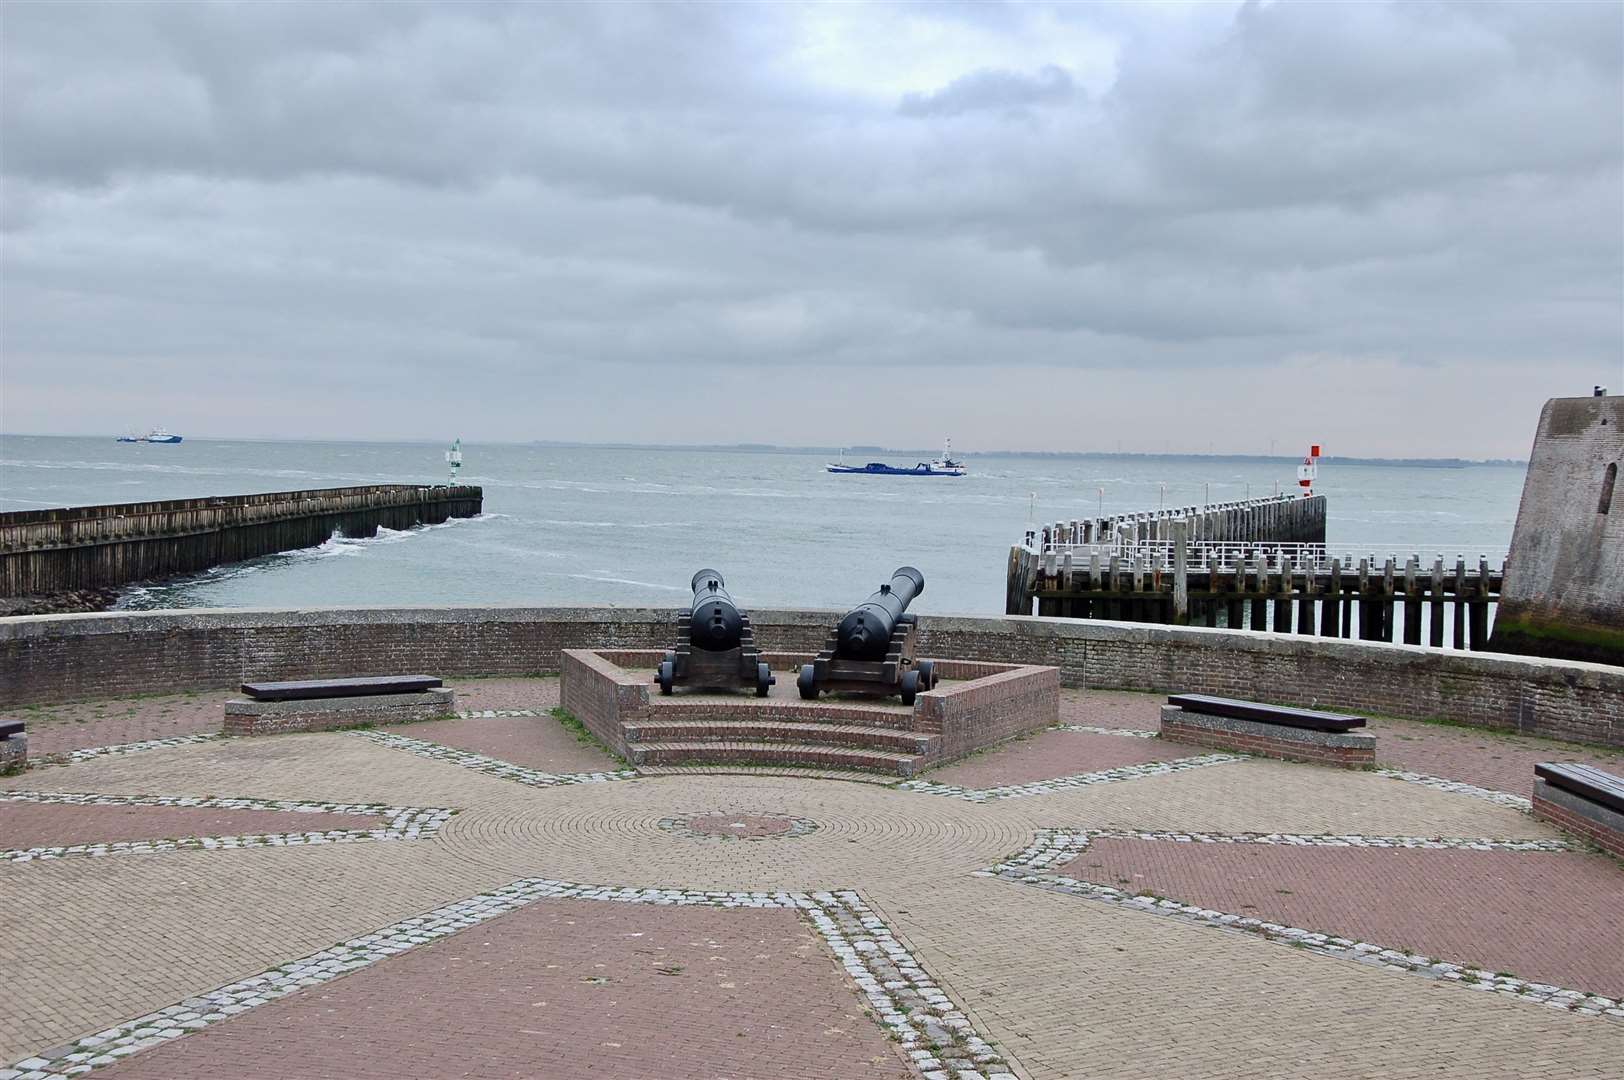 Old cannons still guard the harbour entrance as ships pass going to Antwerp.